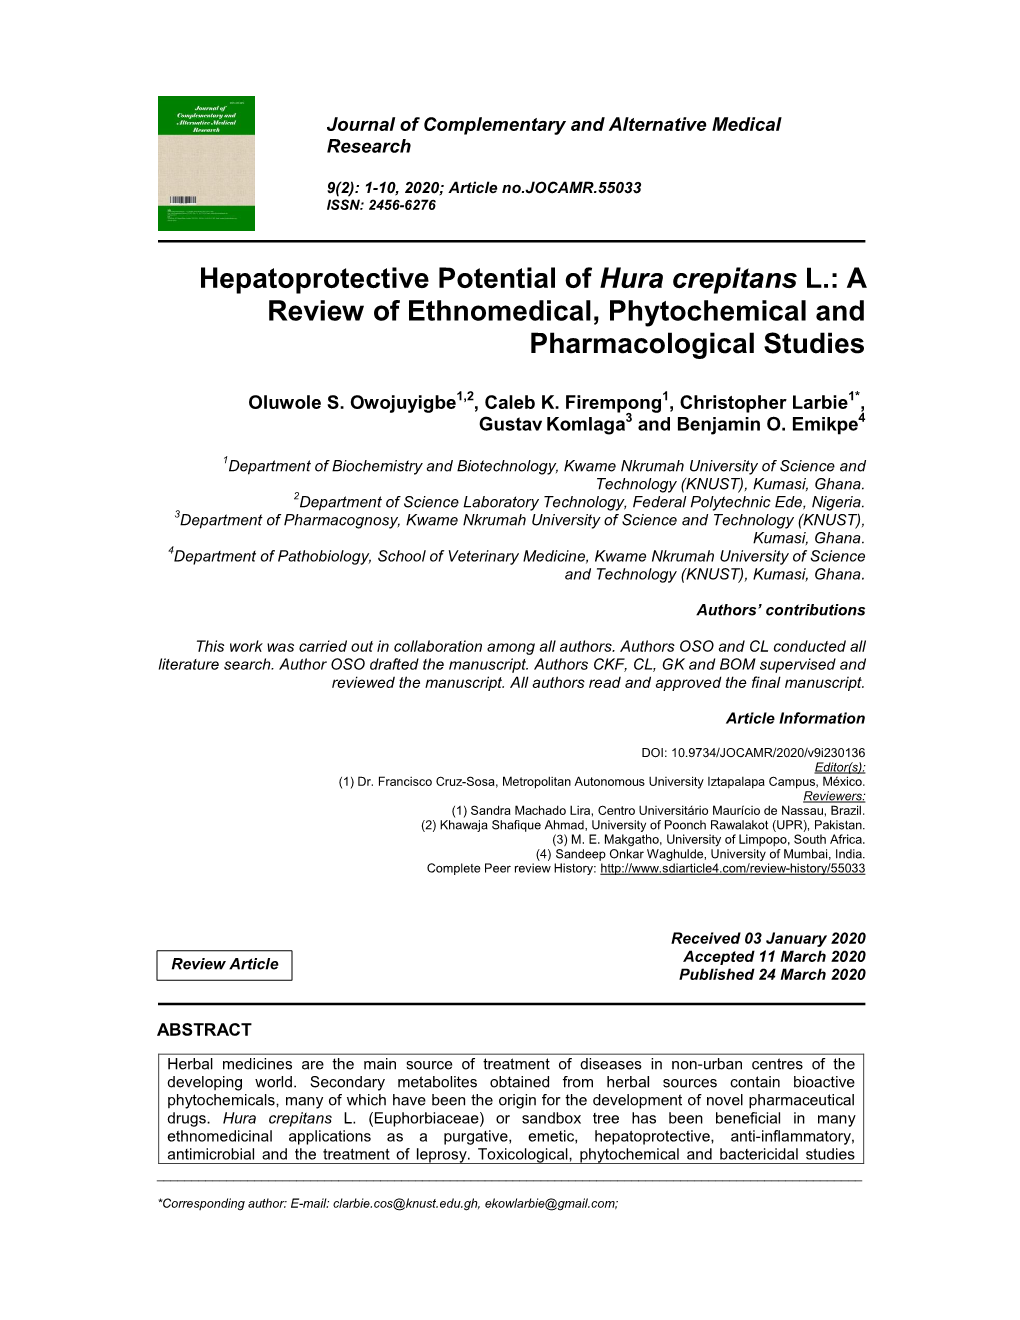 Hepatoprotective Potential of Hura Crepitans L.: a Review of Ethnomedical, Phytochemical and Pharmacological Studies